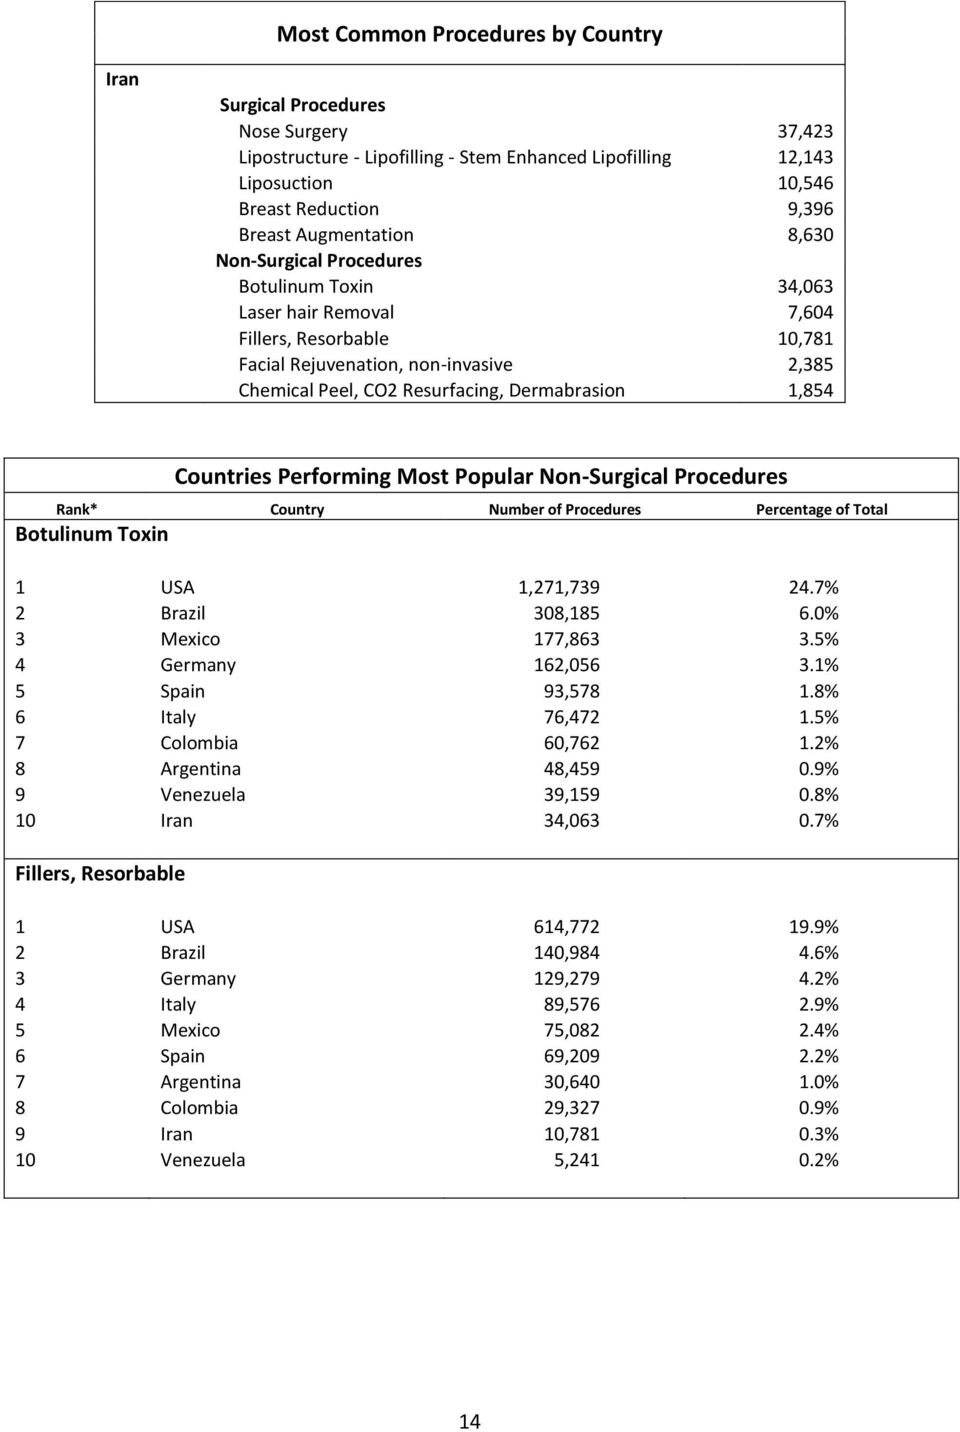 Country Number of Procedures Percentage of Total Botulinum Toxin 1 USA 1,271,739 24.7% 2 Brazil 308,185 6.0% 3 Mexico 177,863 3.5% 4 Germany 162,056 3.1% 5 Spain 93,578 1.8% 6 Italy 76,472 1.